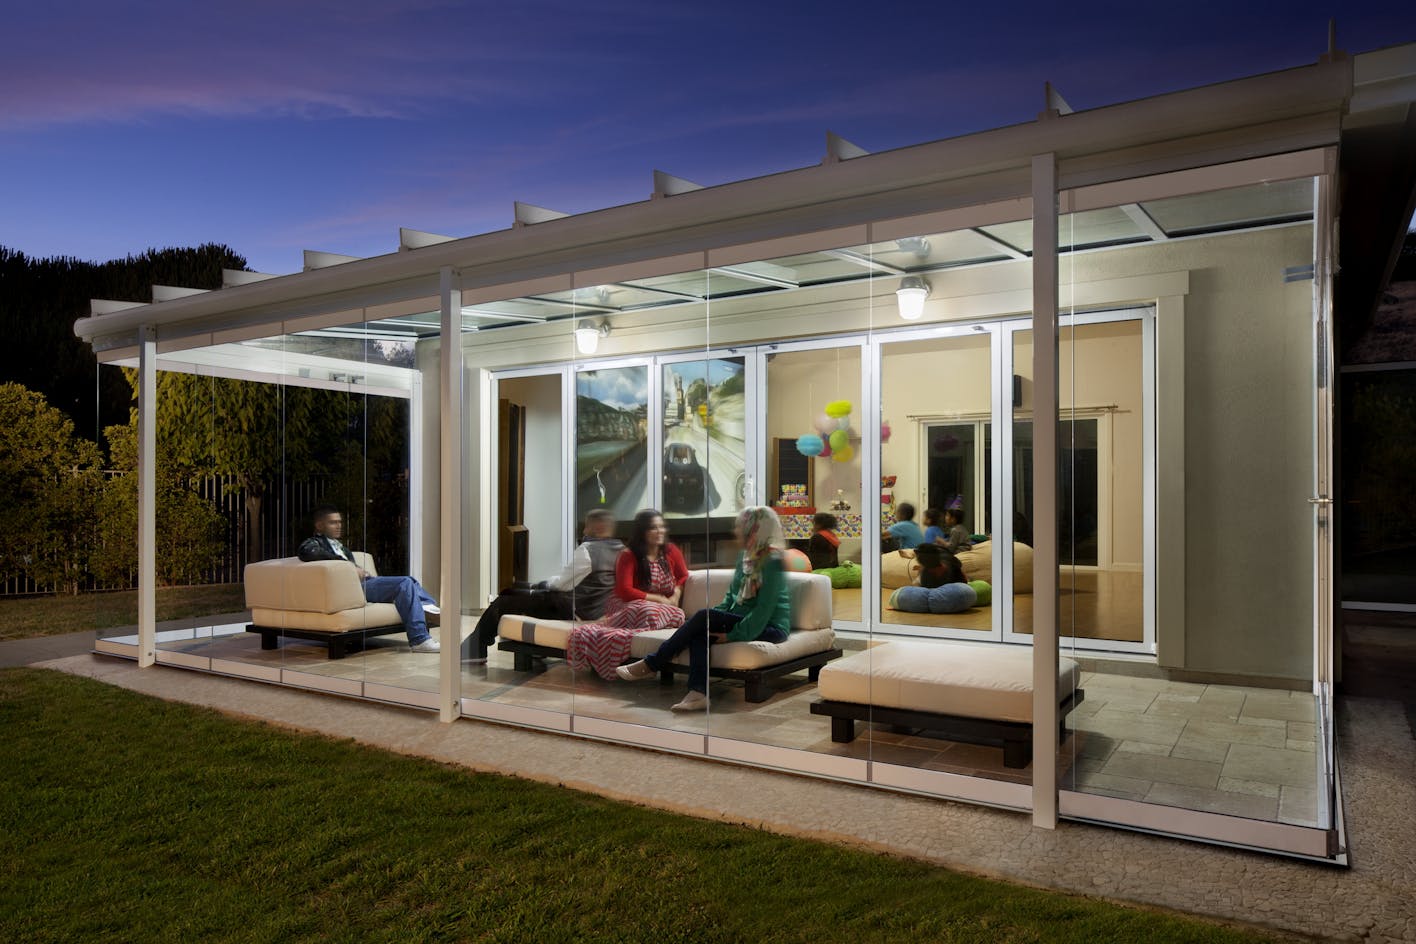 Porch enclosed with folding glass walls for entertaining space year-round.